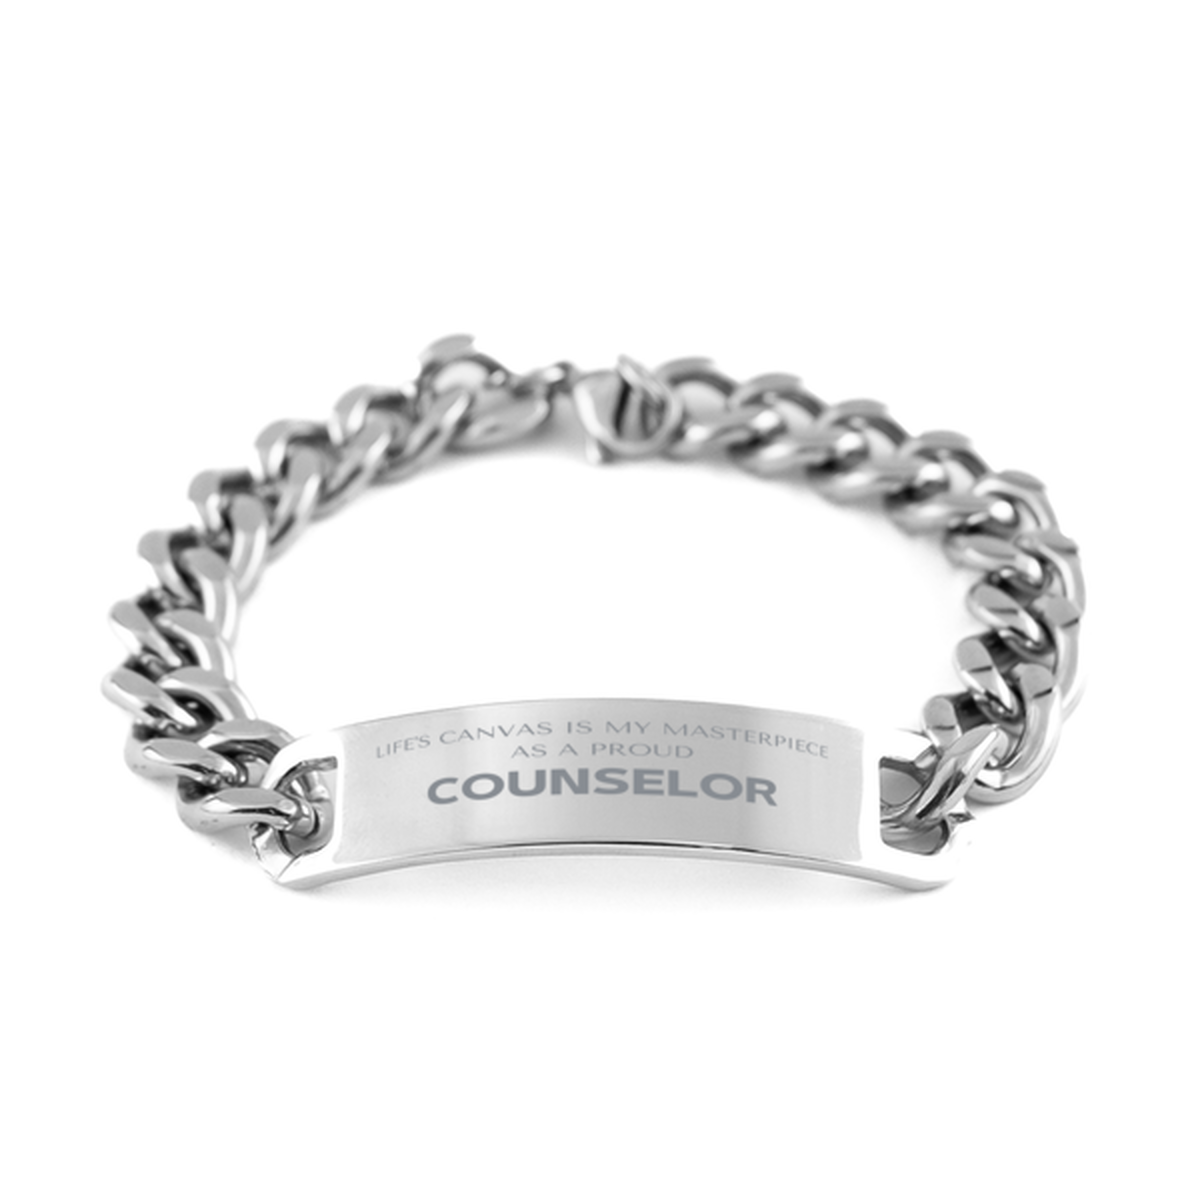 Proud Counselor Gifts, Life's canvas is my masterpiece, Epic Birthday Christmas Unique Cuban Chain Stainless Steel Bracelet For Counselor, Coworkers, Men, Women, Friends